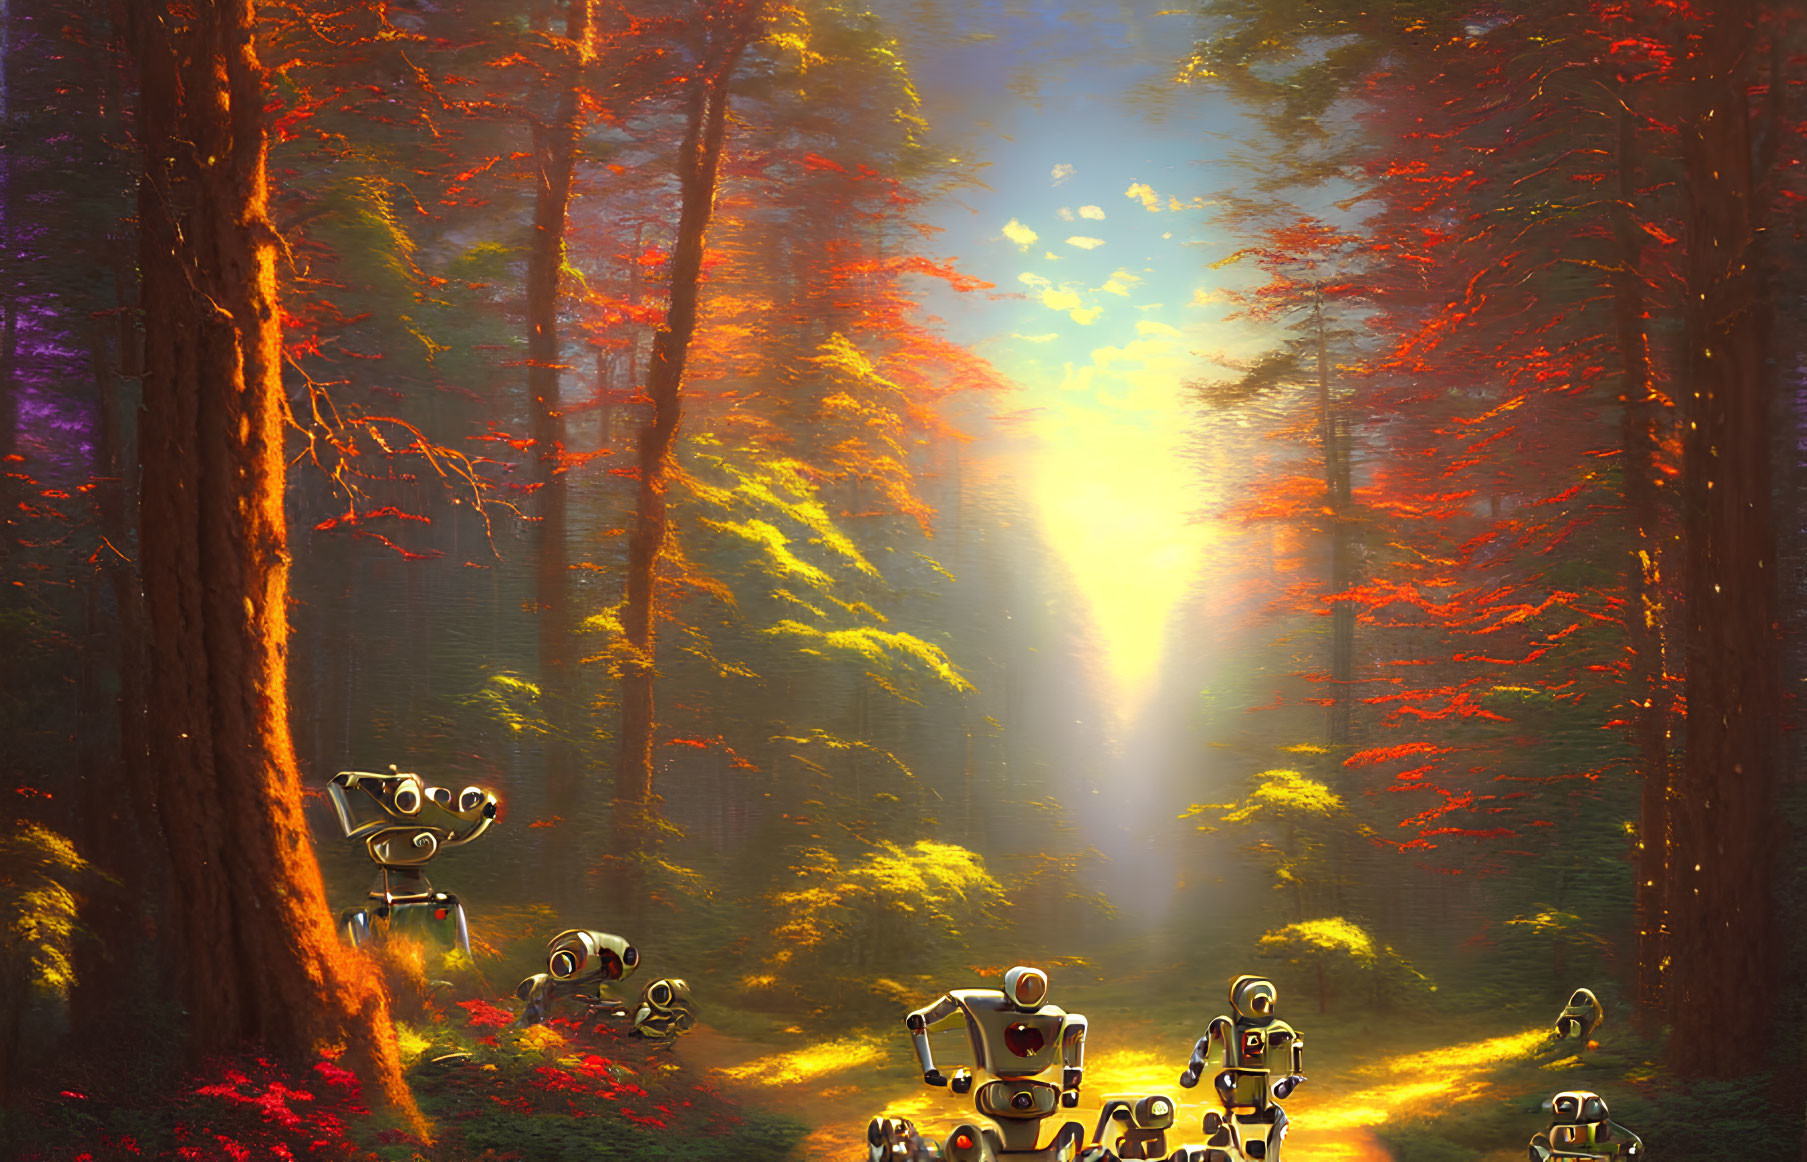 Digital art: Small robots in vibrant forest